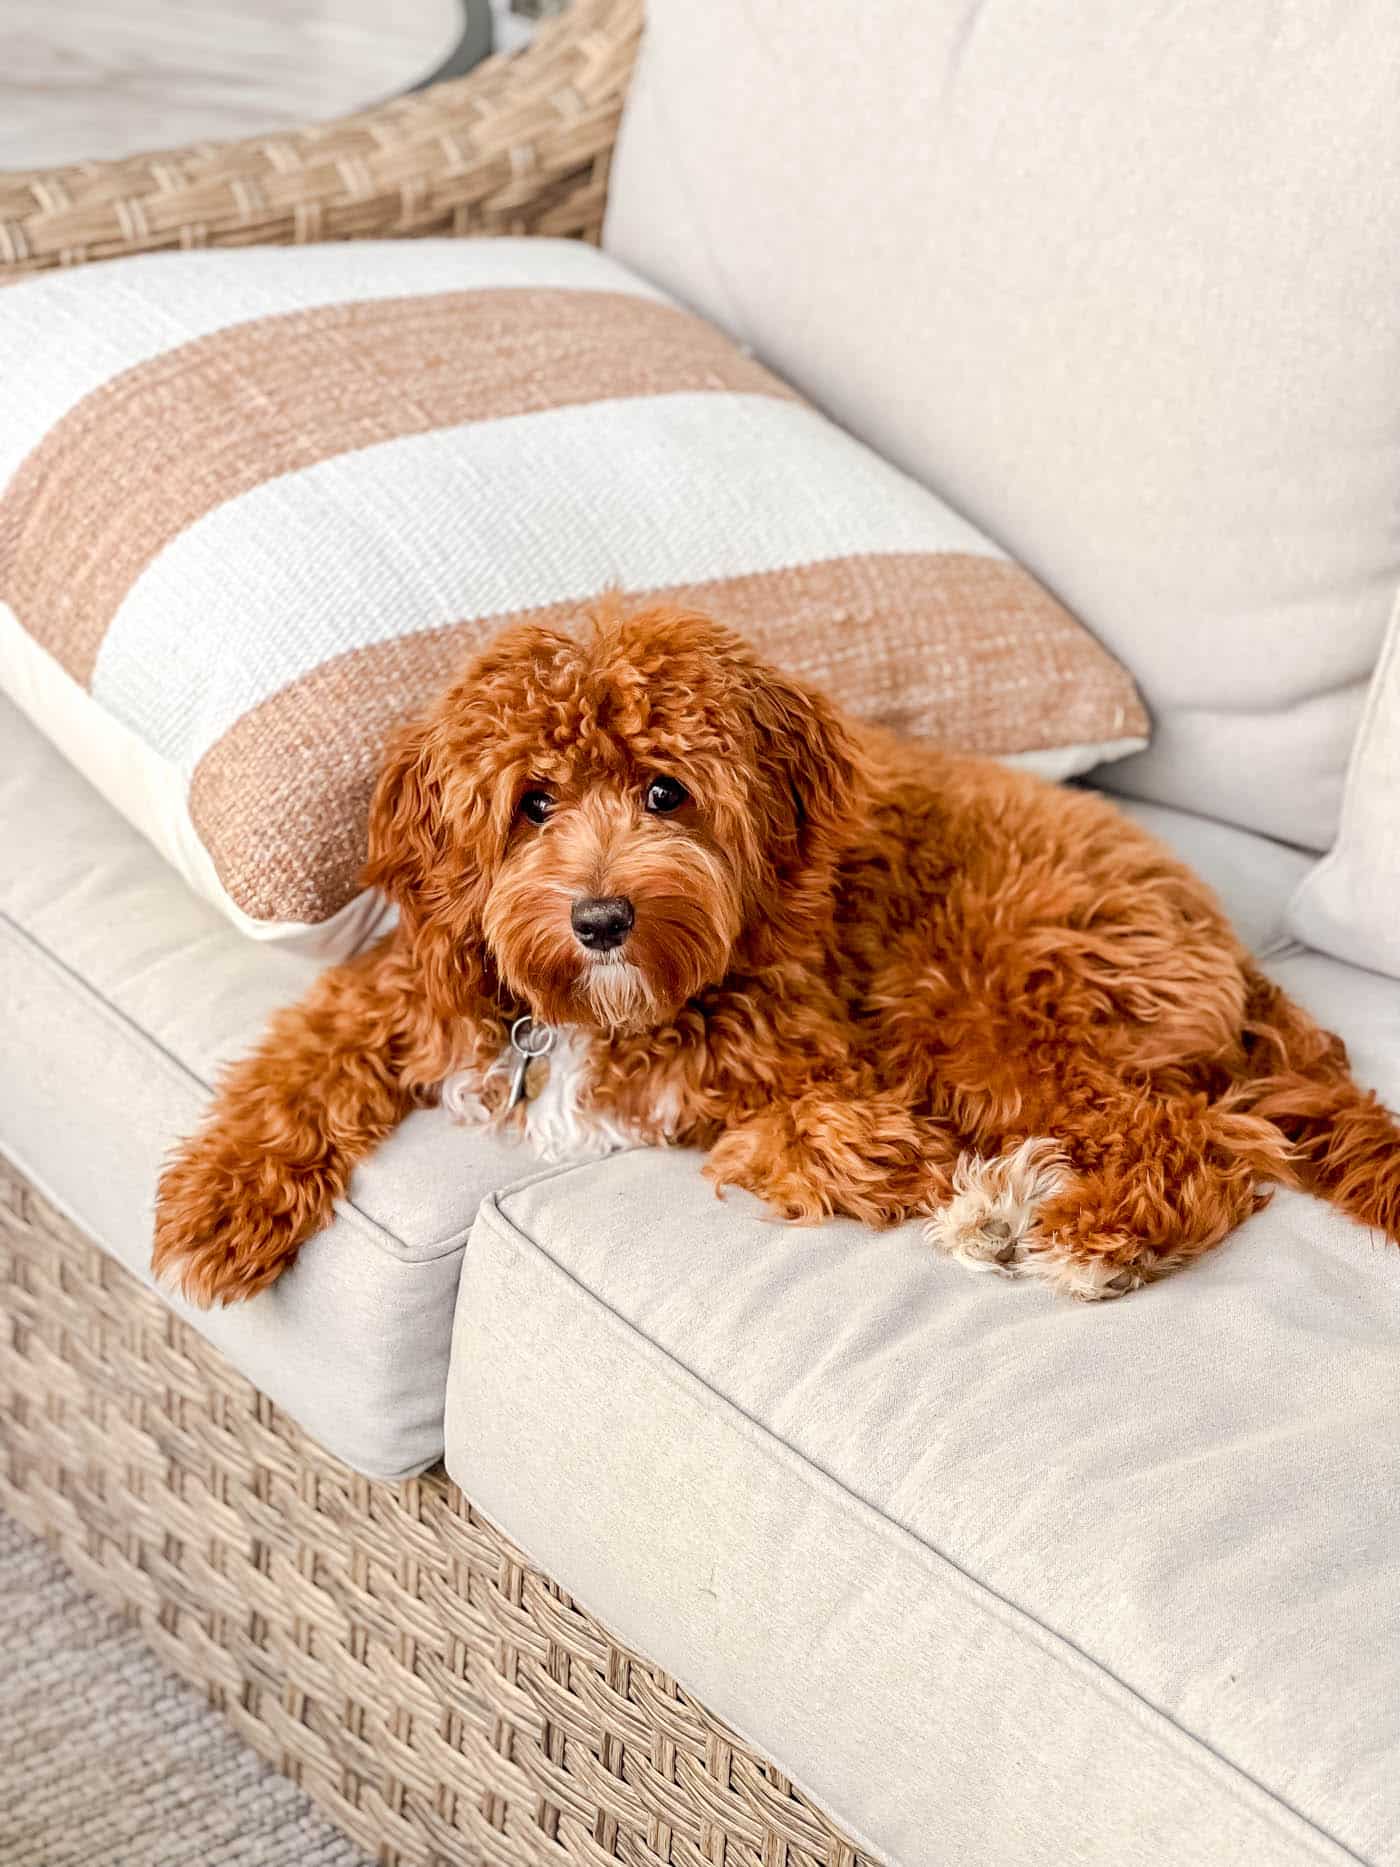 red and white Cavapoo pupping on a wicker outdoor sofa with striped white and burnt orange throw pillow next to the dog.